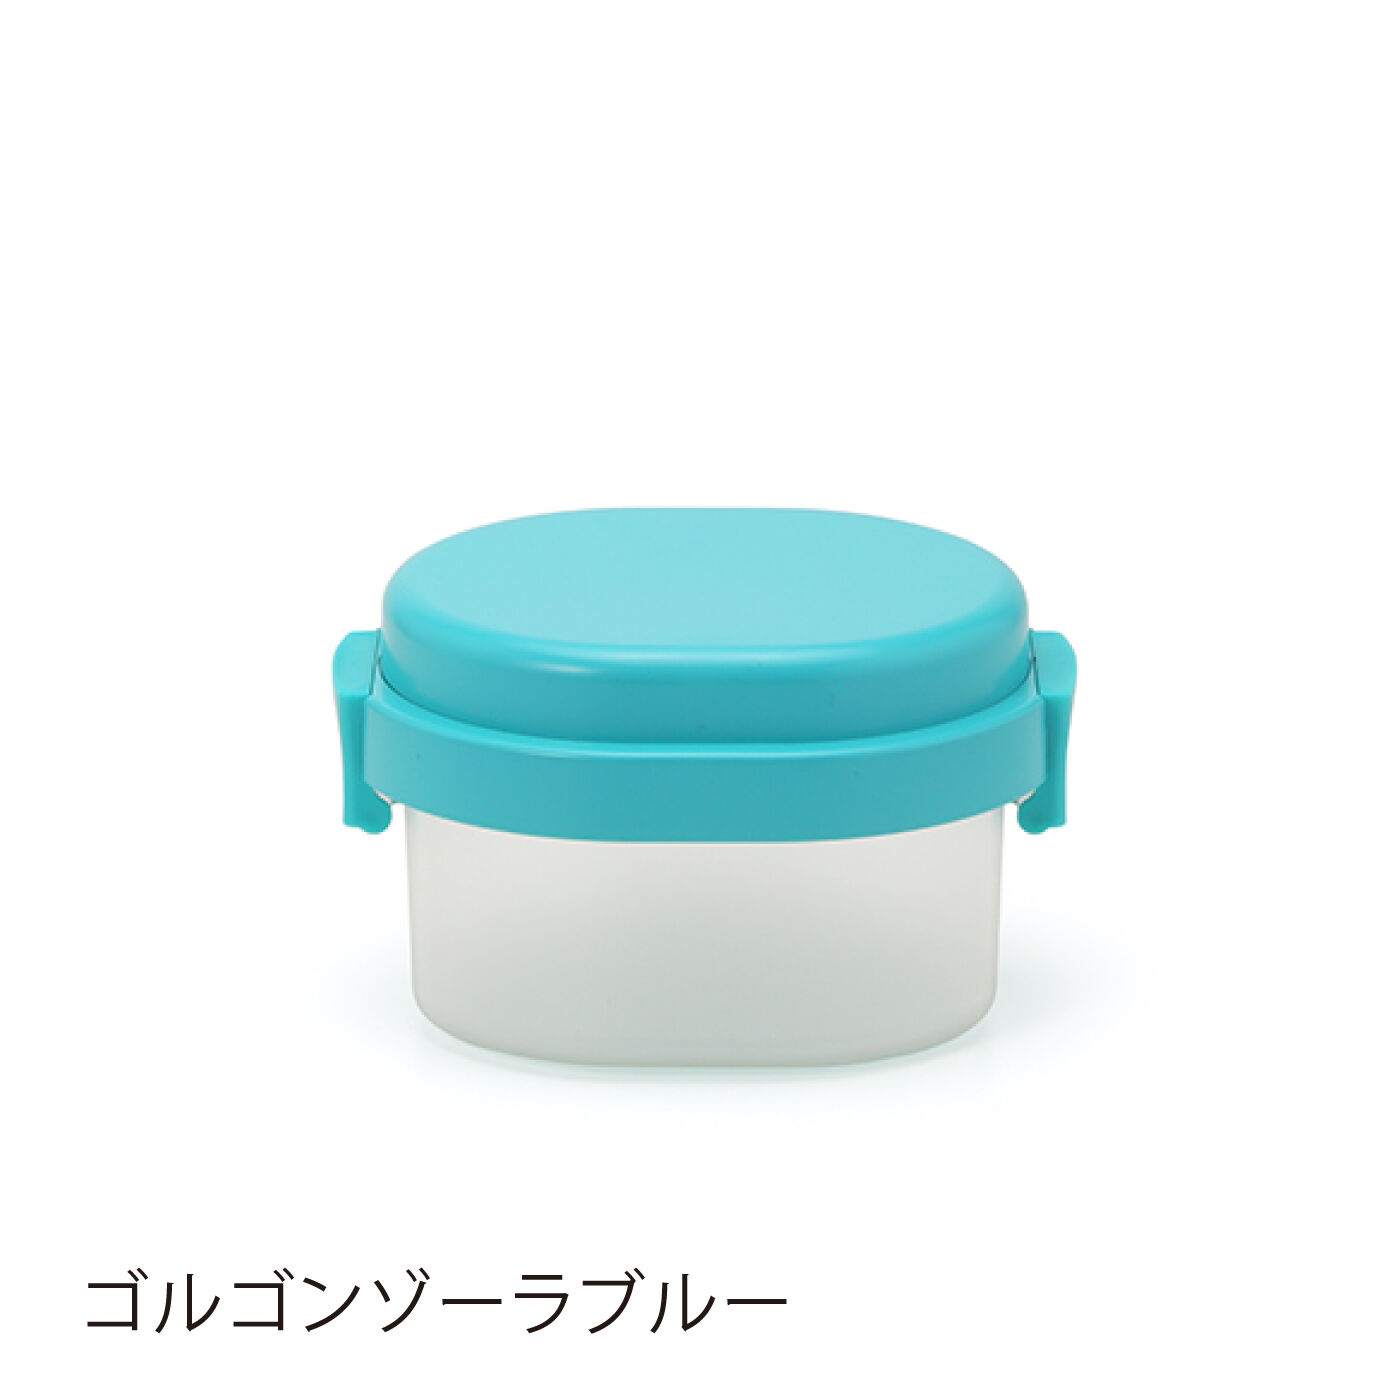 FELISSIMO PARTNERS|GEL-COOL plus dome Sサイズ CLEAR LUNCH BOX